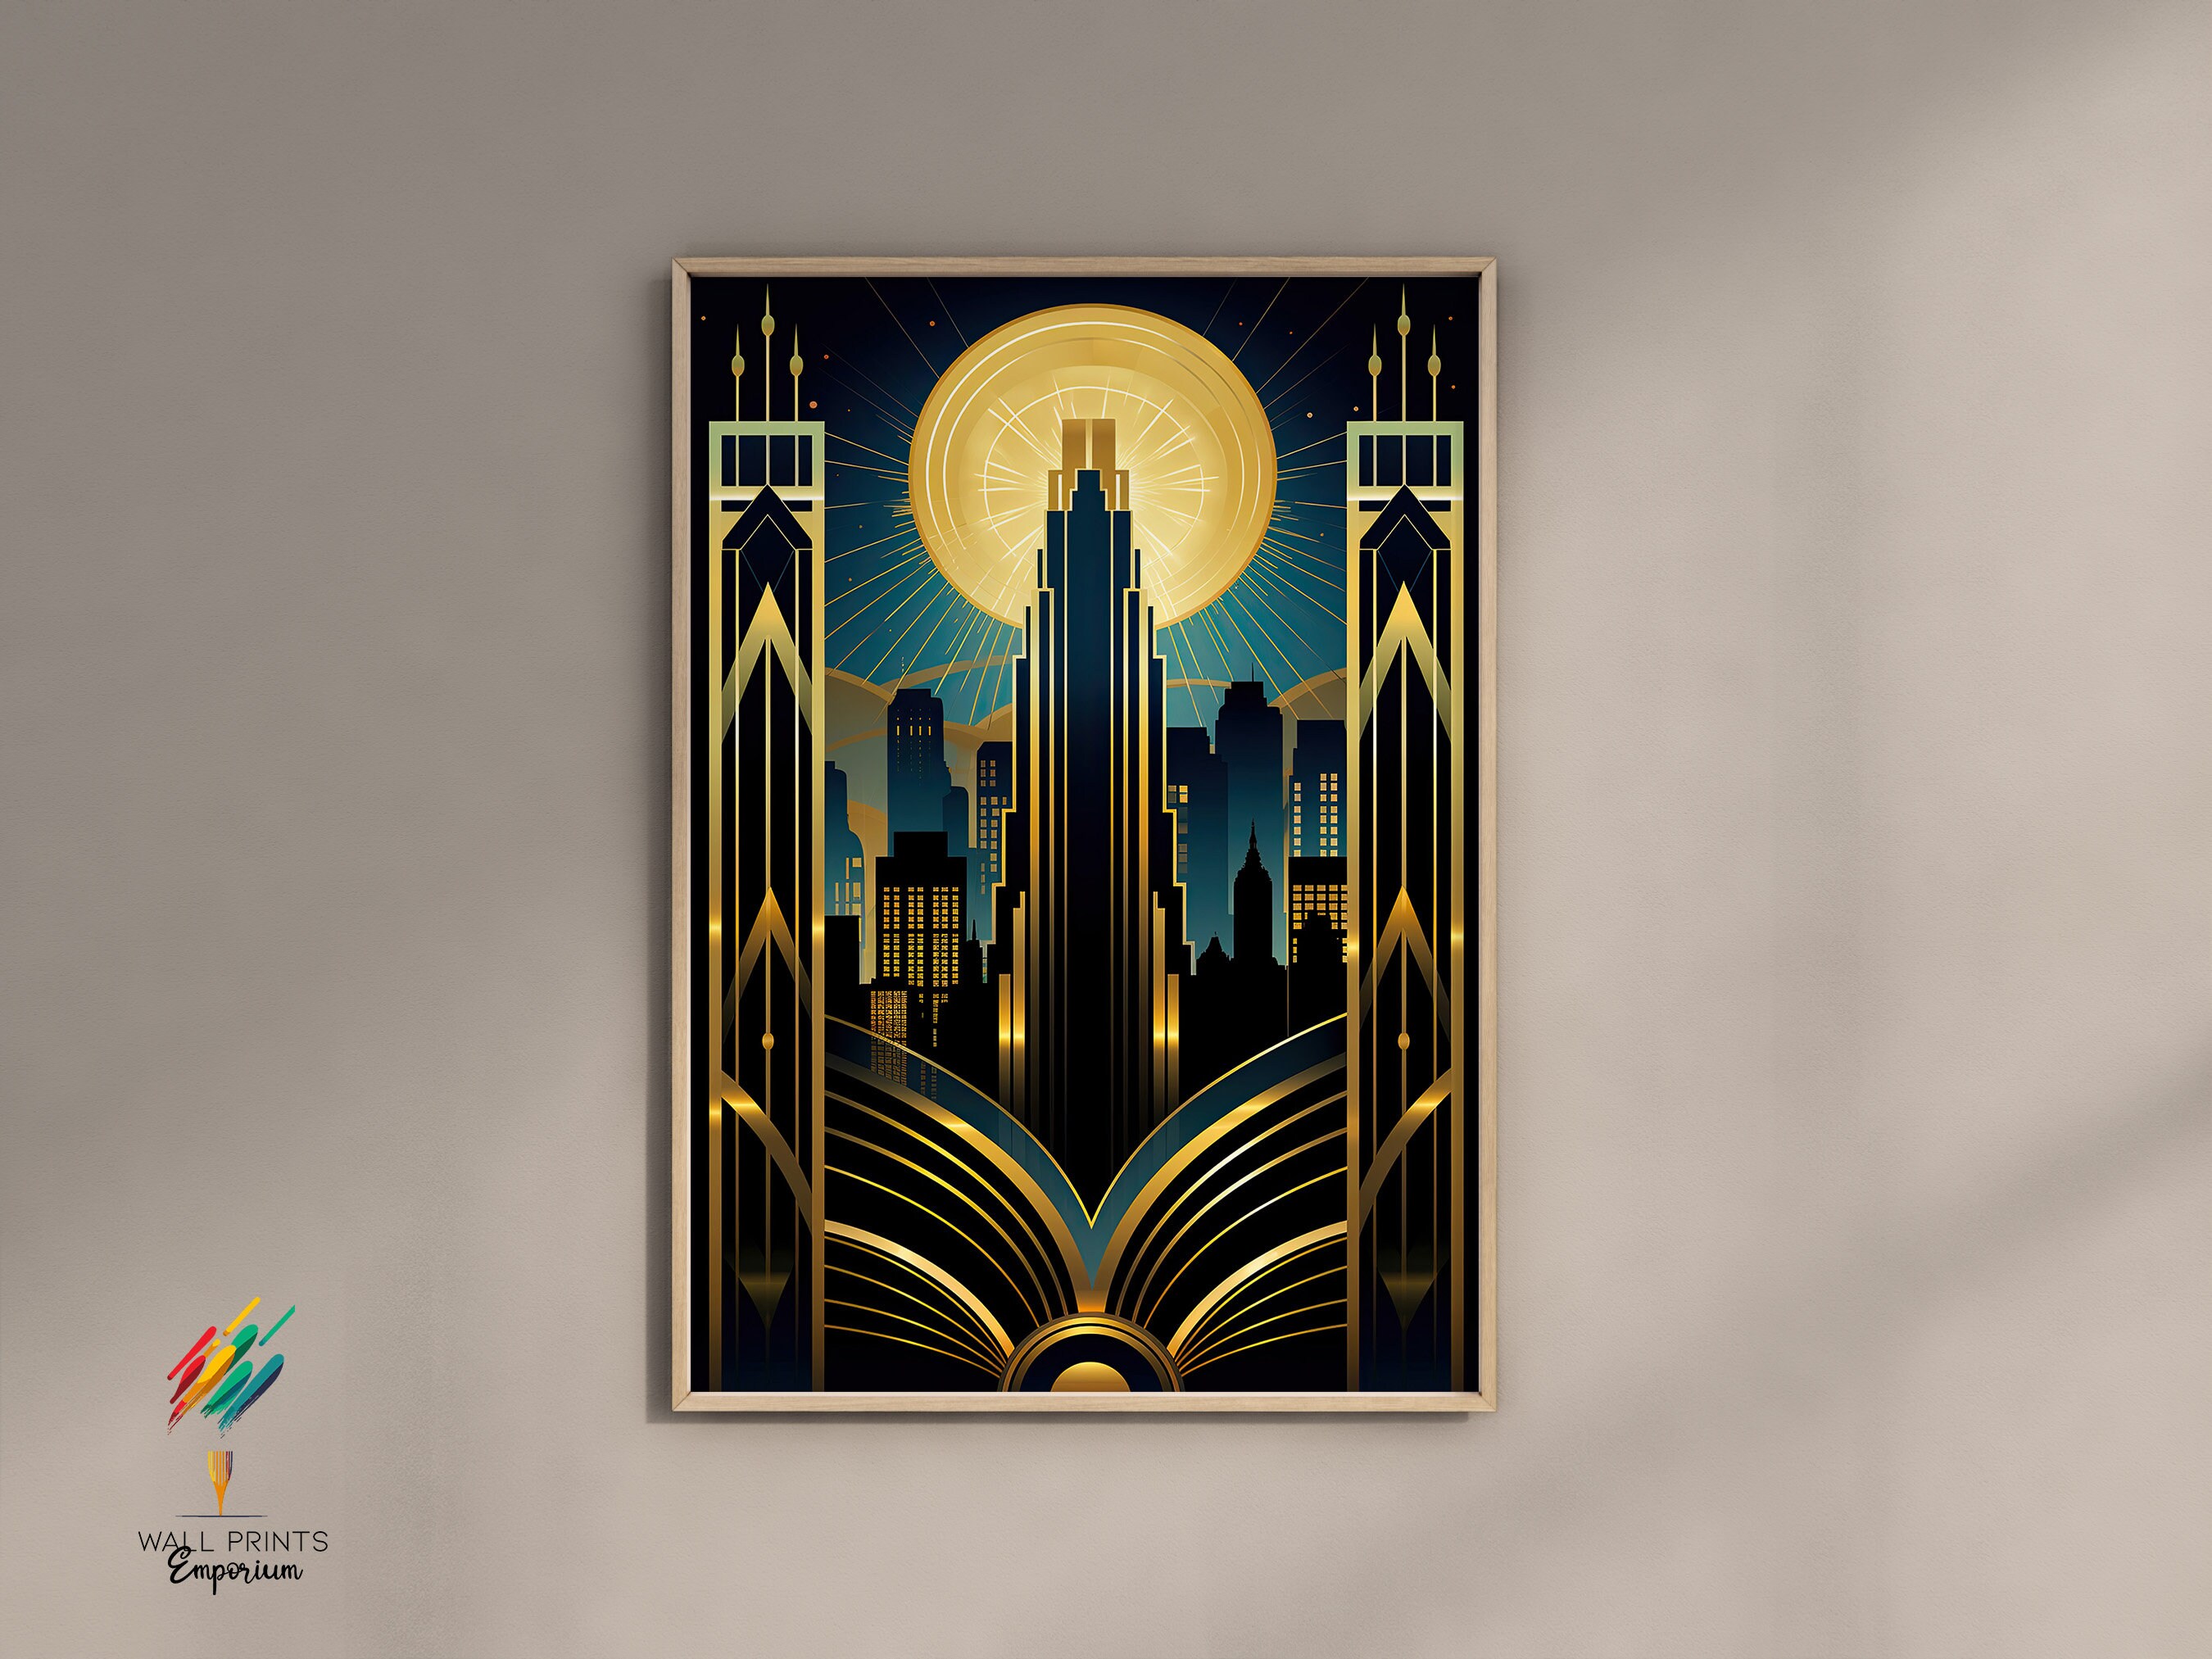 60 Inspiring Designs in the Style of Art Deco Travel Posters